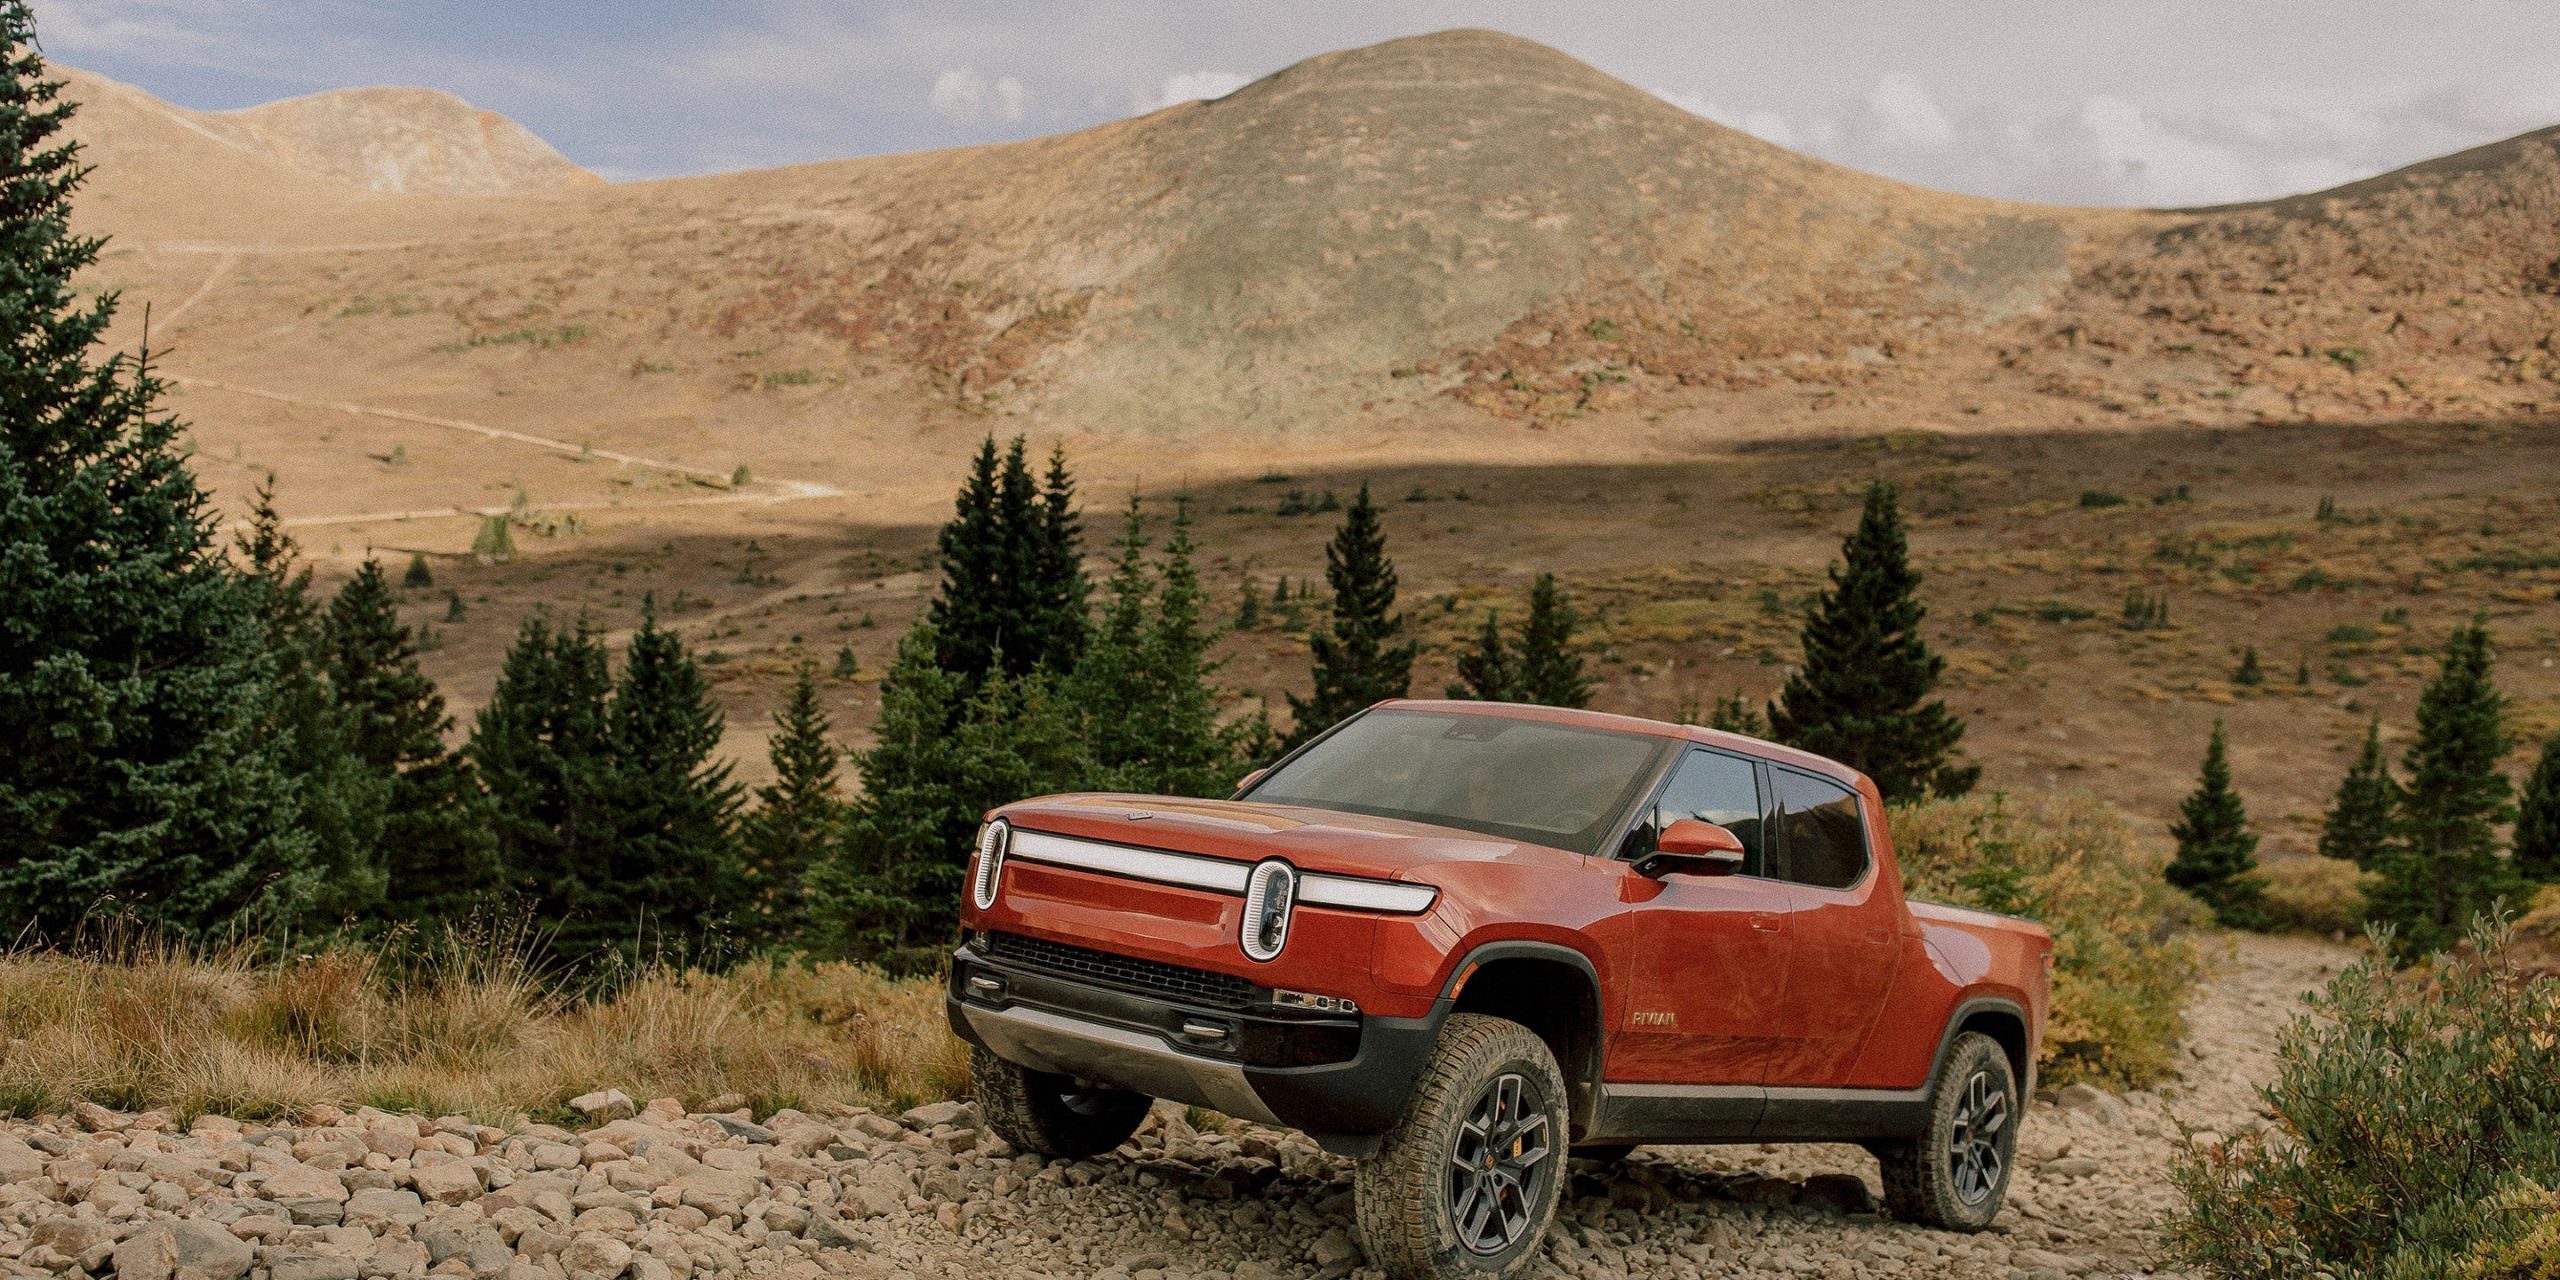 The 2022 Rivian R1T.